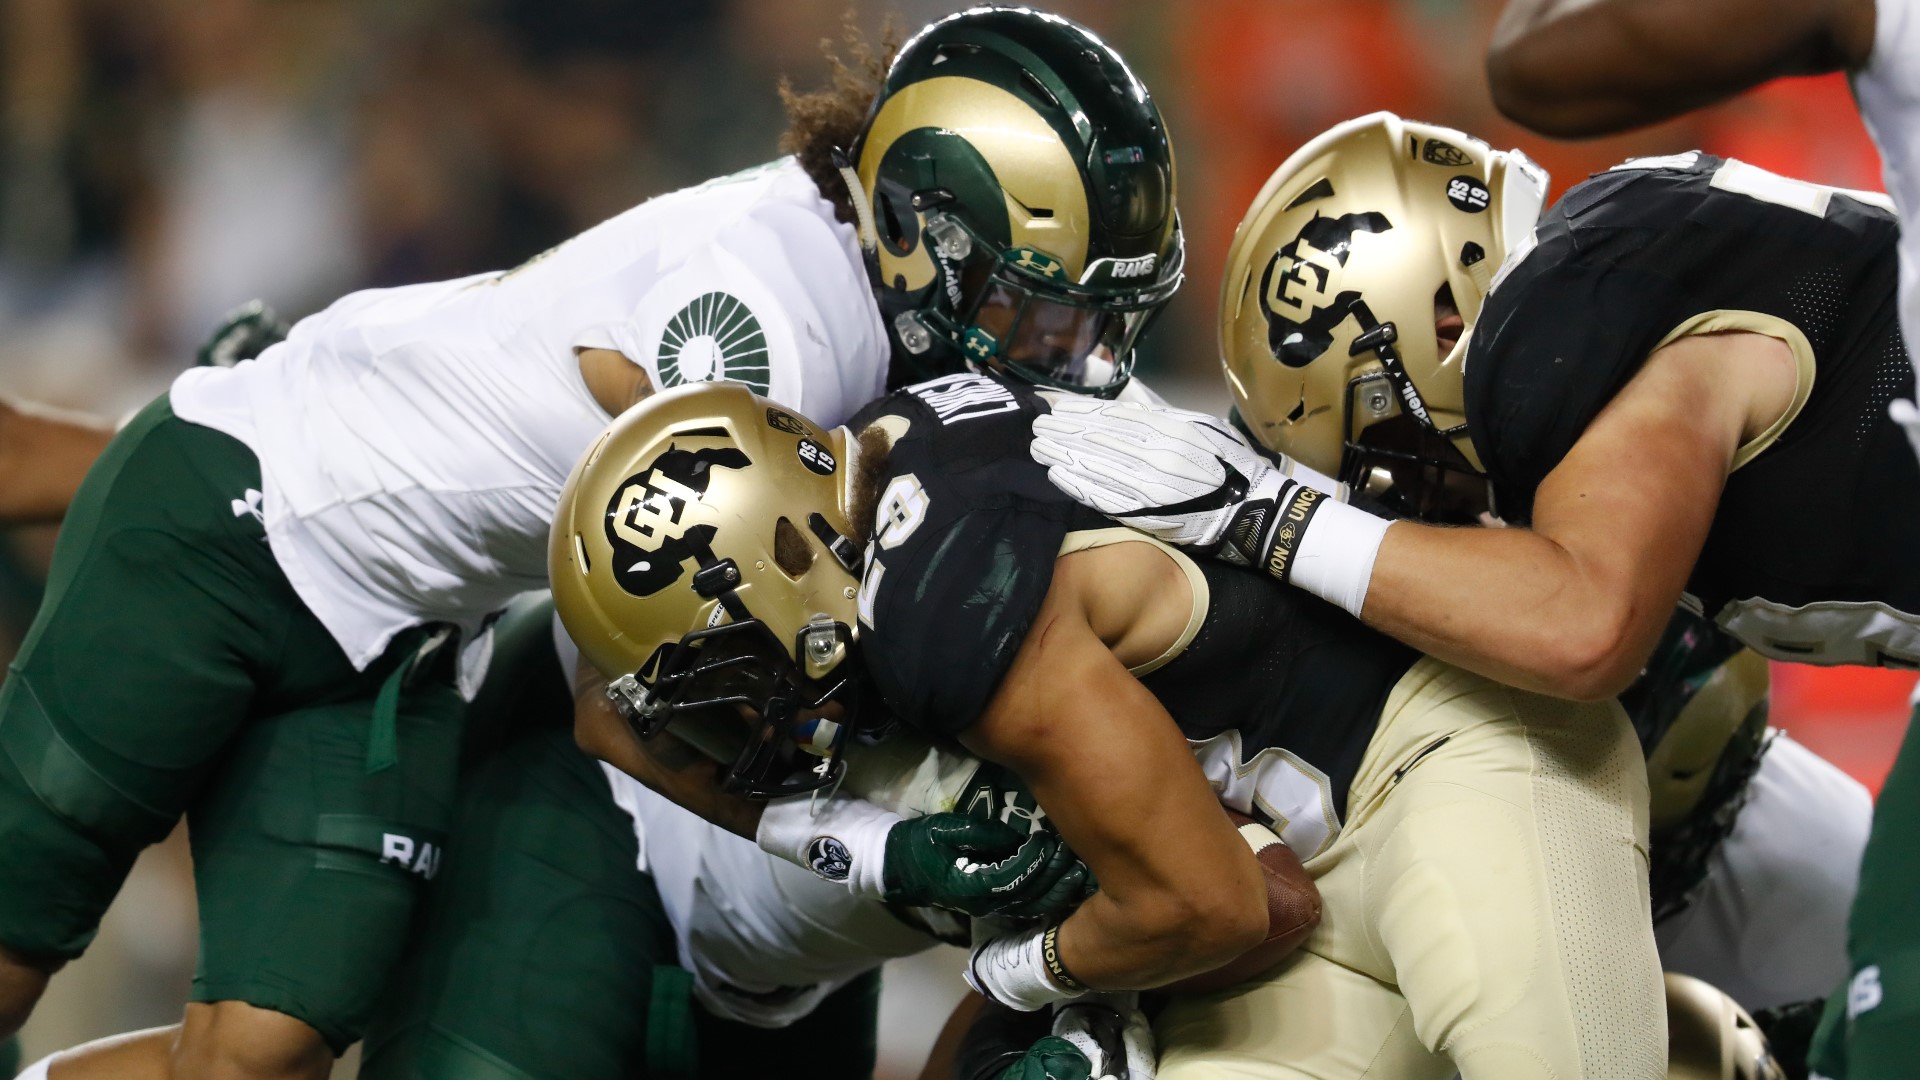 Colorado State will square off with Colorado on Saturday night at Folsom Field in Boulder.